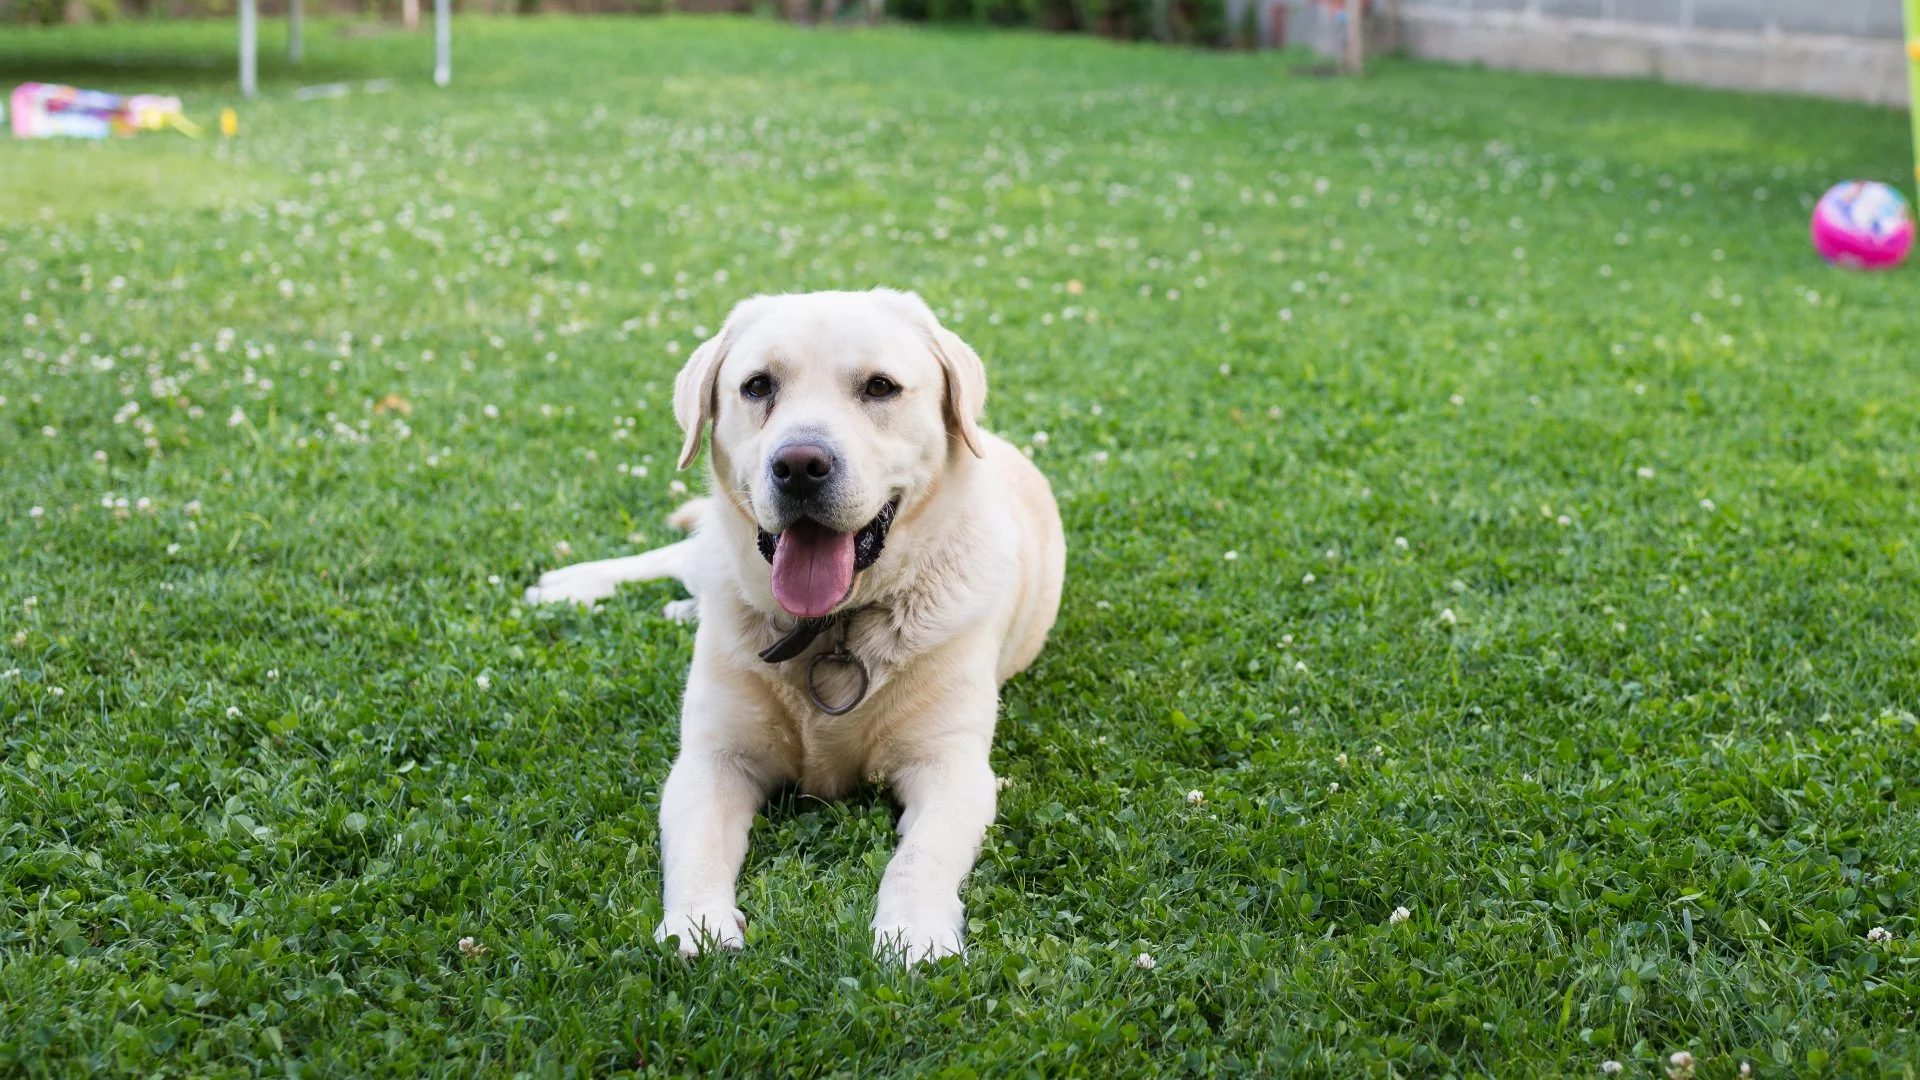 How Long Should You Keep Your Pet Indoors After a Lawn Fertilizer Treatment?